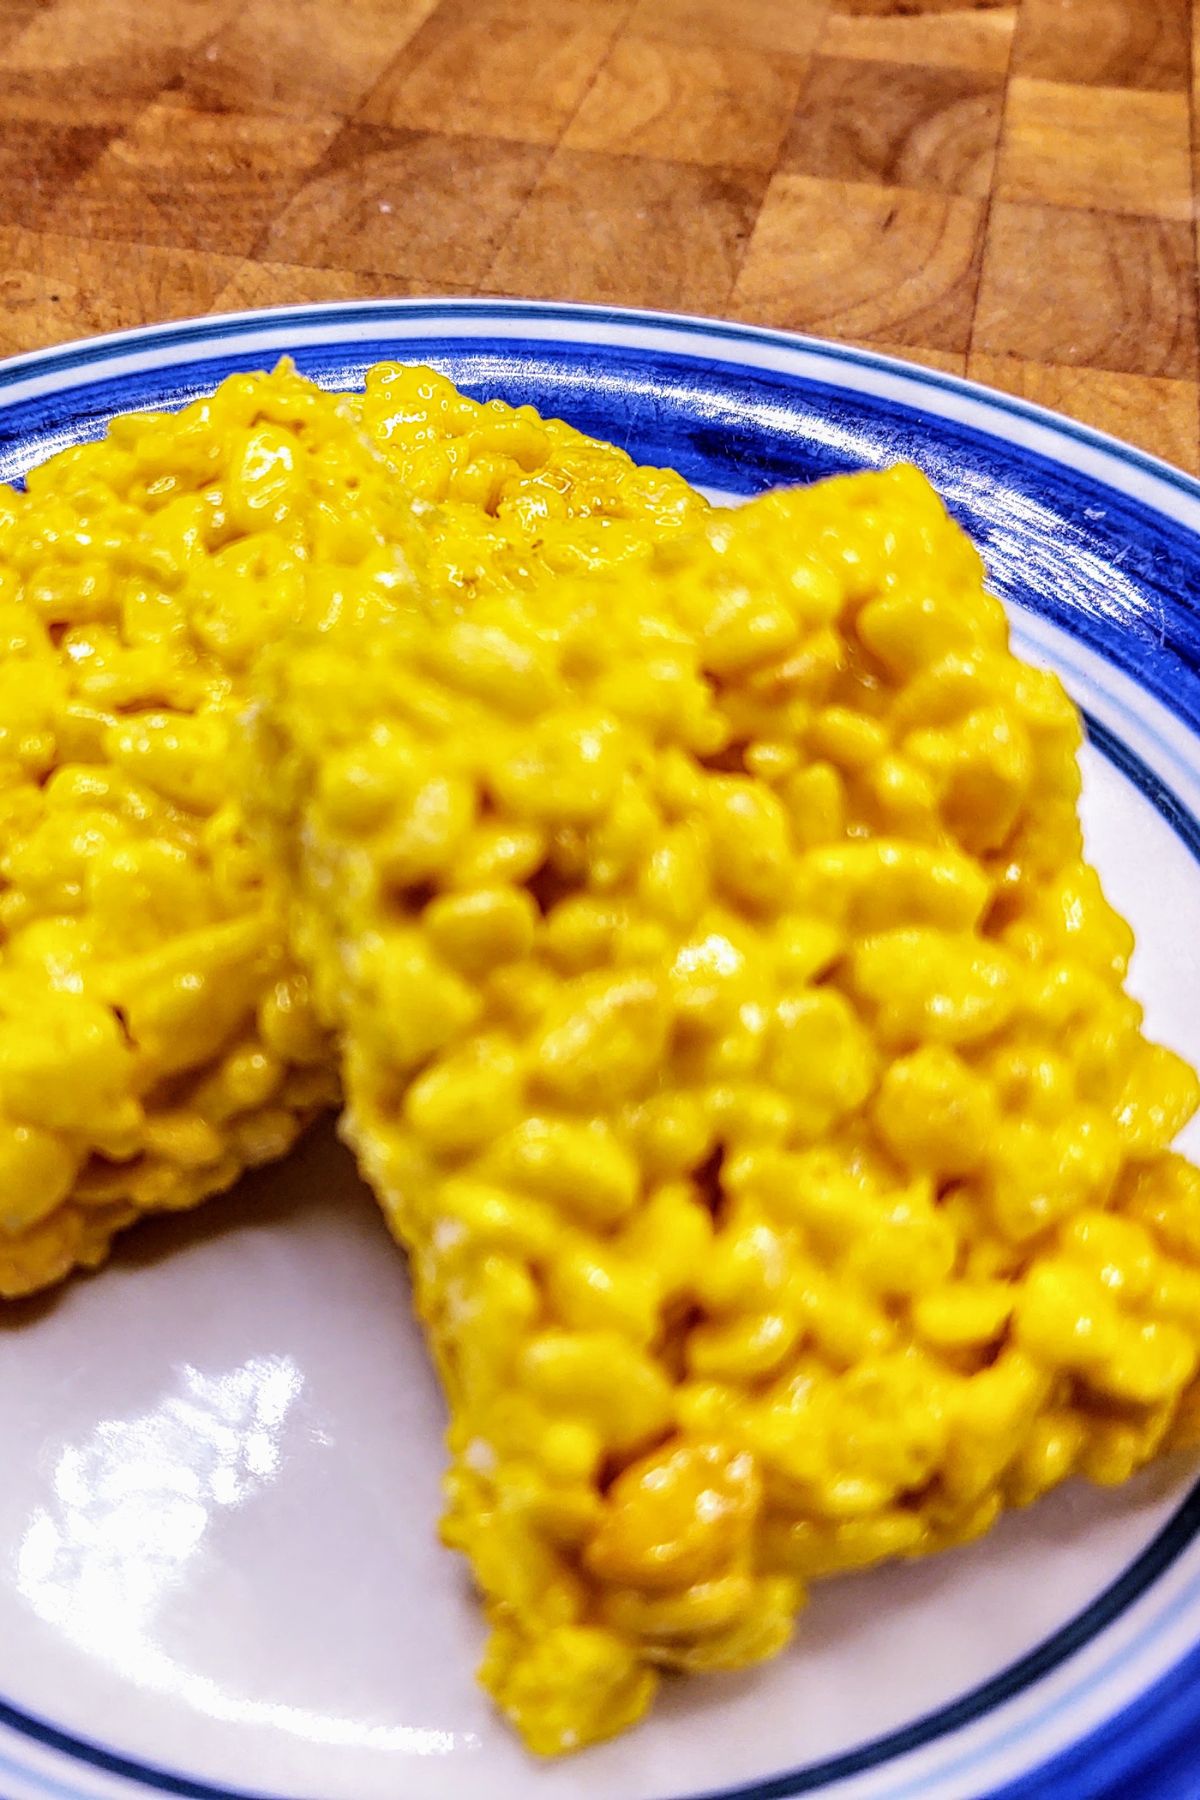 Plate with yellow rice krispie treats.